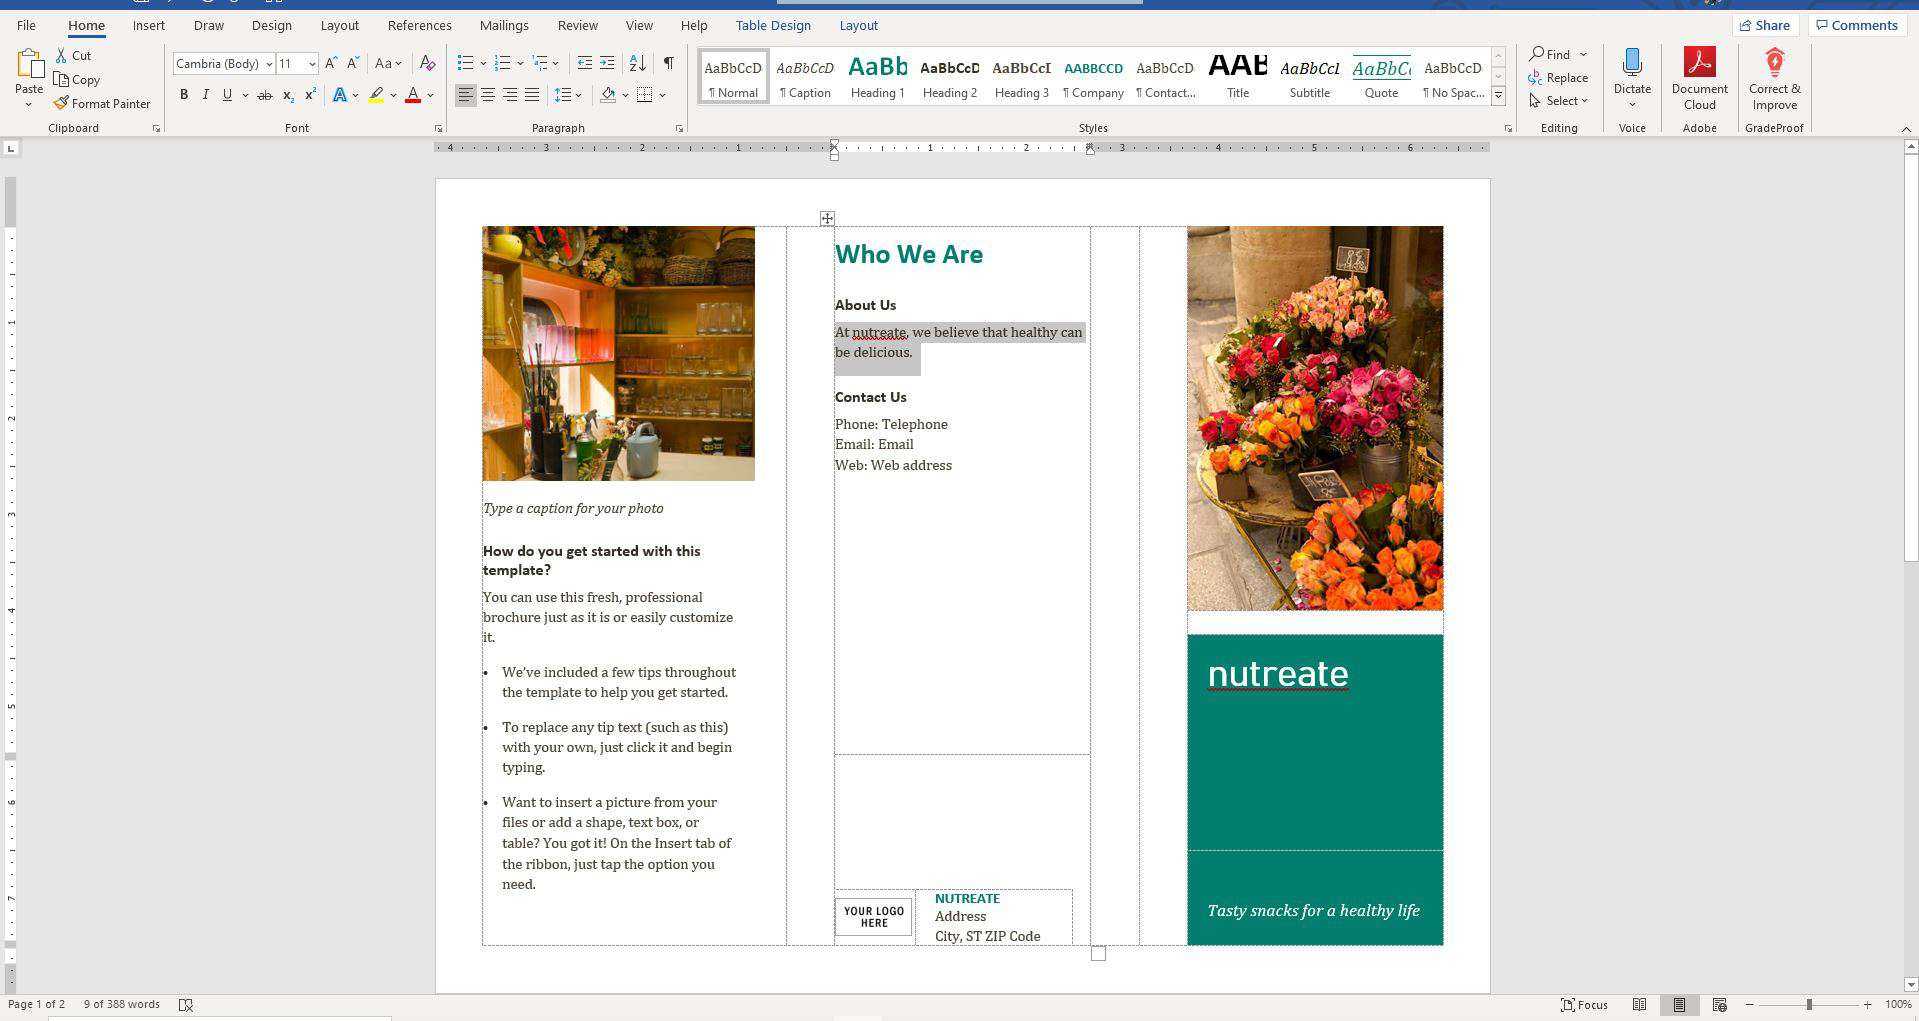 How To Create A Trifold Brochure In Word 2010 - Calep Throughout Free Brochure Templates For Word 2010